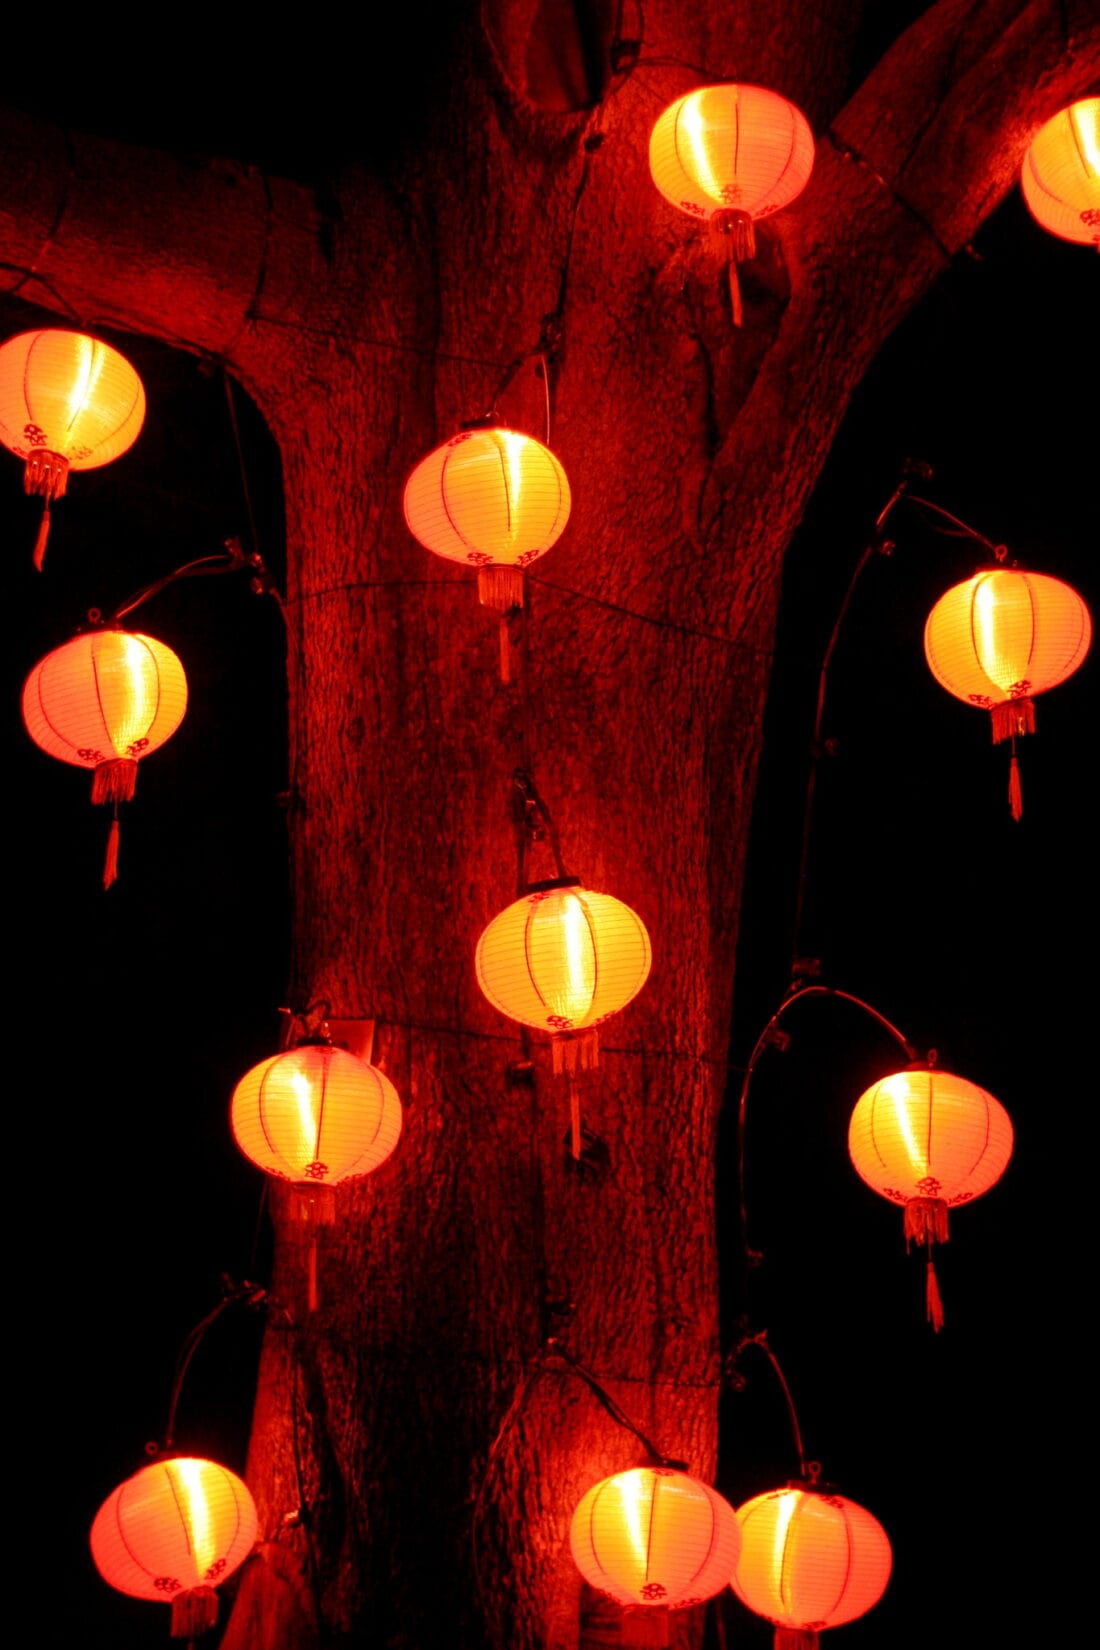 A tree trunk in the garden is adorned with multiple glowing red paper lanterns hanging from its branches. The lanterns cast a warm, festive light against the dark night background, creating an enchanting and vibrant display reminiscent of a Christian Dior fashion show.